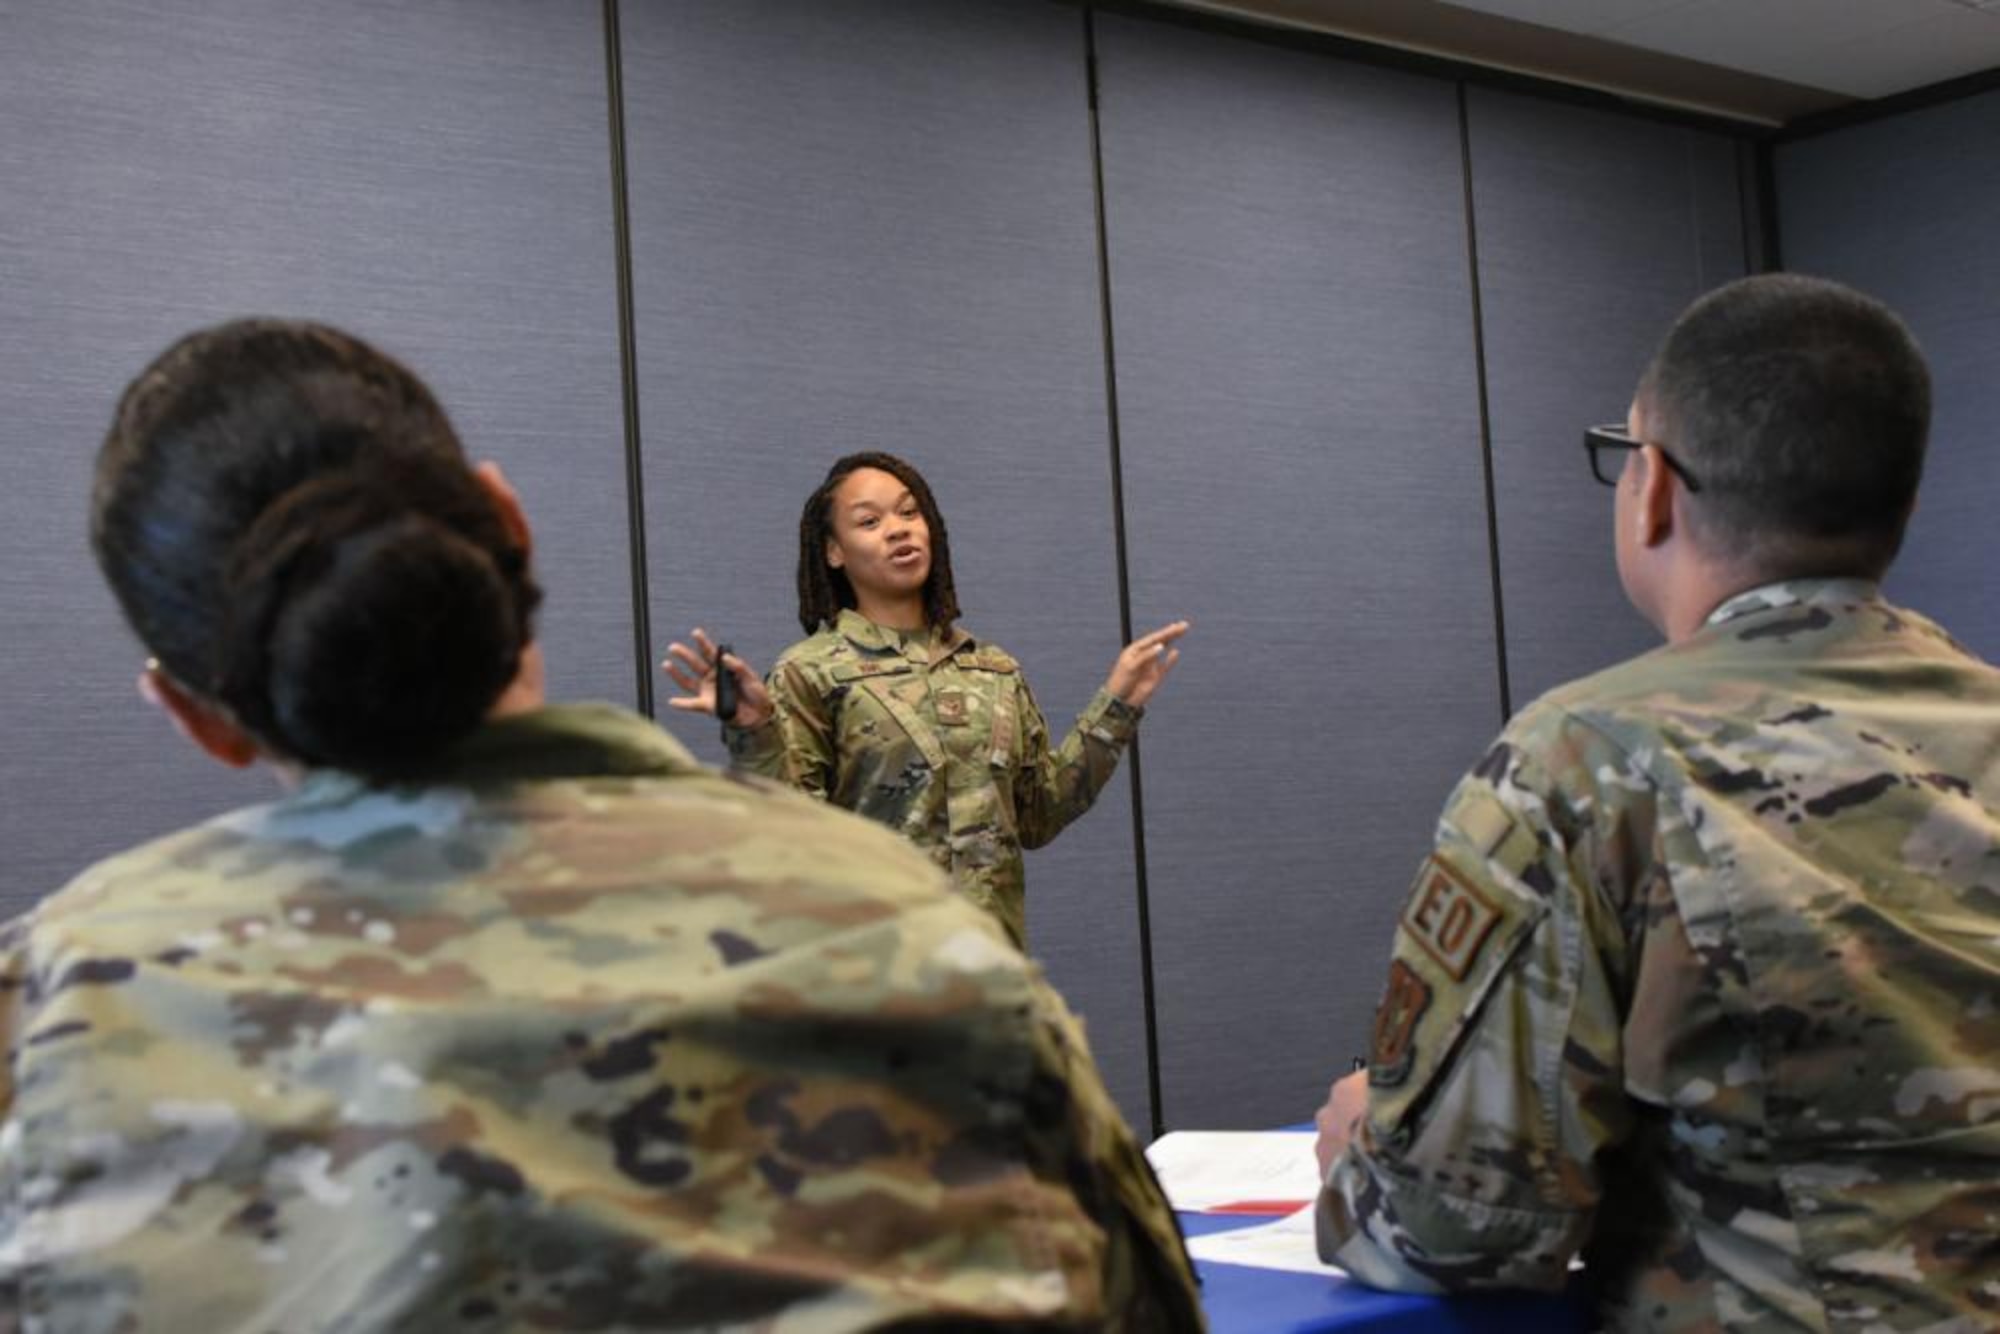 Senior Airman Maleya Neall, 301st Communications Squadron, radio frequency technician, does teach-back on mindfulness during a Resiliency Training Assistant course at Naval Air Station Joint Reserve Base Fort Worth, Texas, Sept. 8, 2022. The students taught what they learned as the instructors critiqued their presentation. (U.S. Air Force photo by Staff Sgt. Randall Moose)